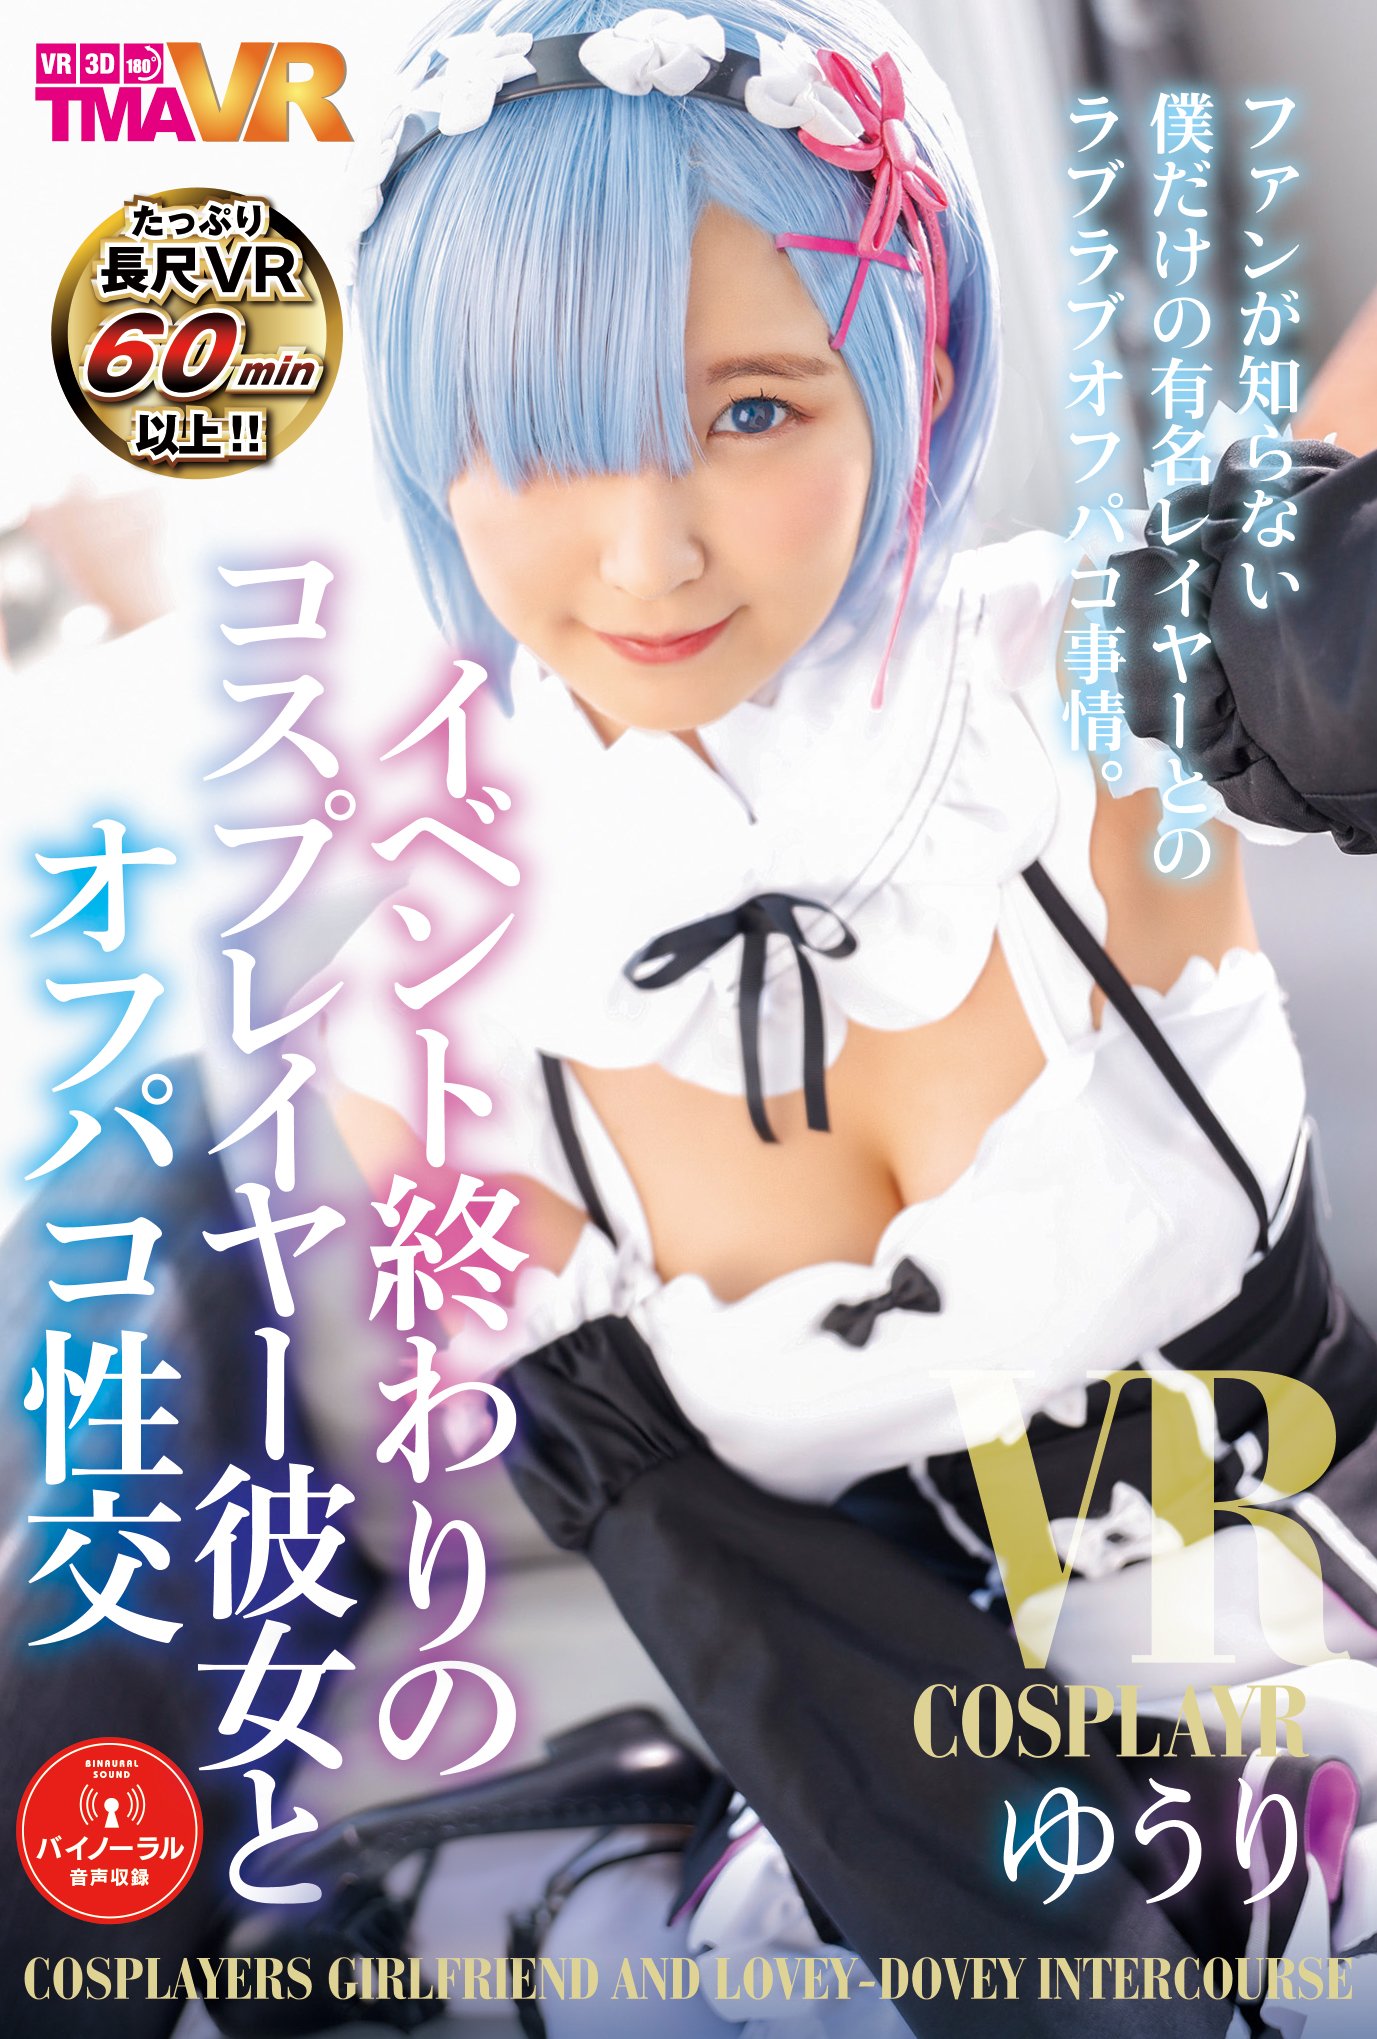 【Part02】Cosplayer at the end of the event Yuri VR  Porn Video 1